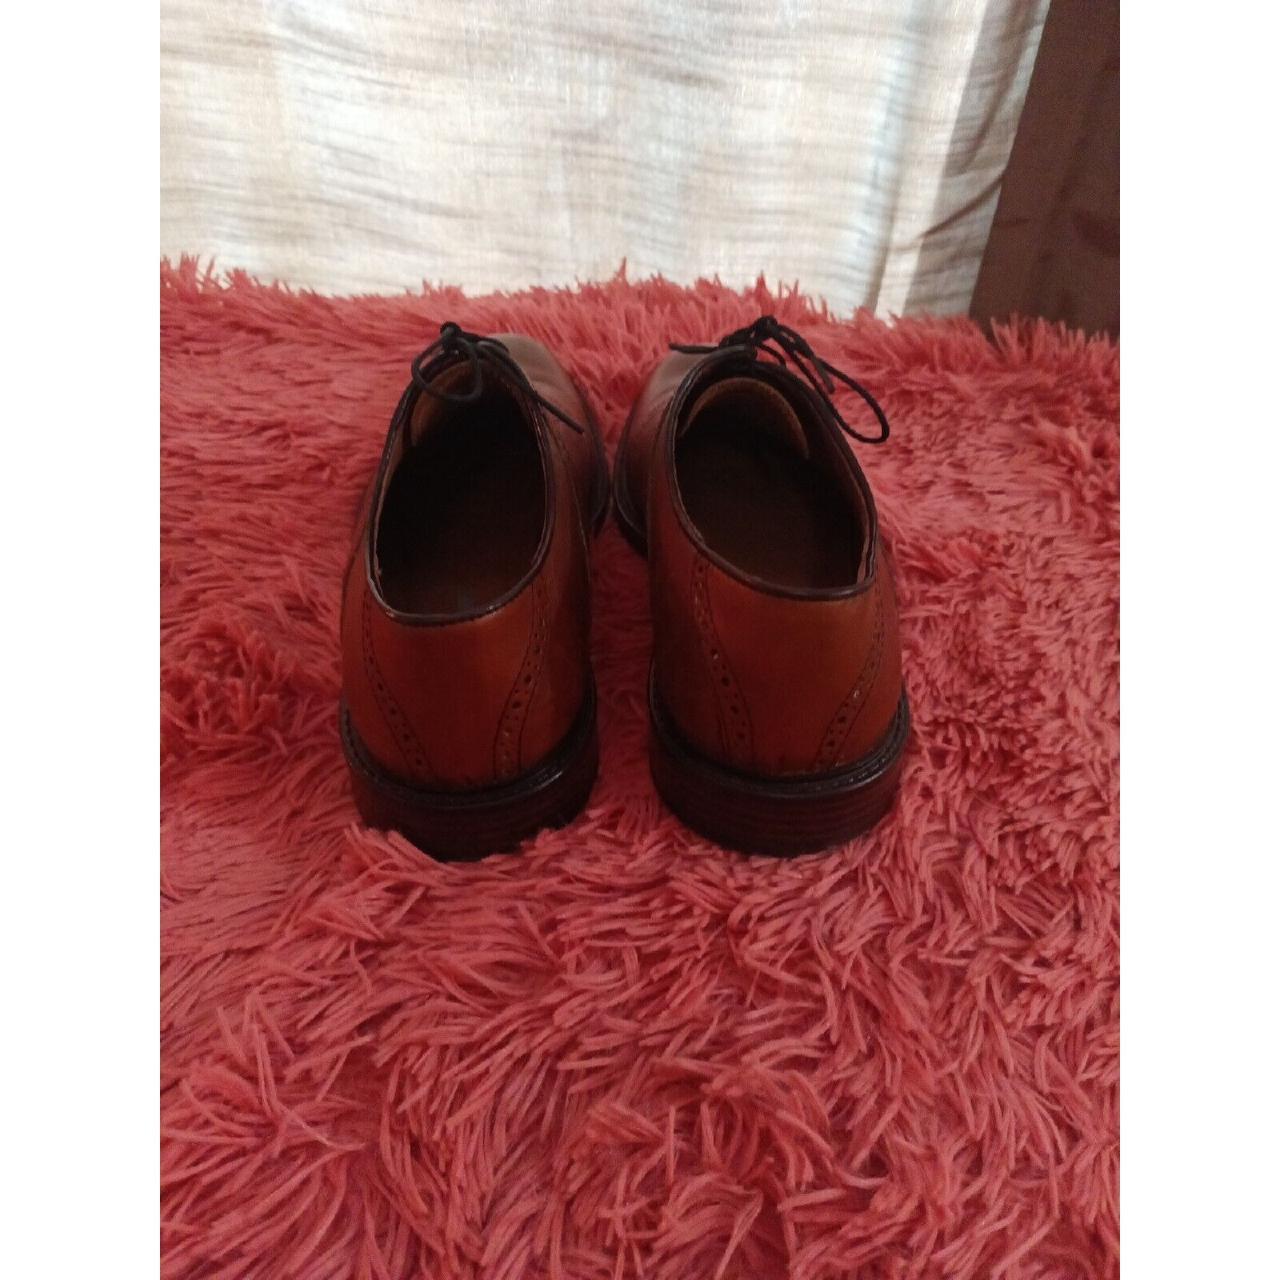 Men's Johnston And Murphy Brown Lace Up Leather... - Depop